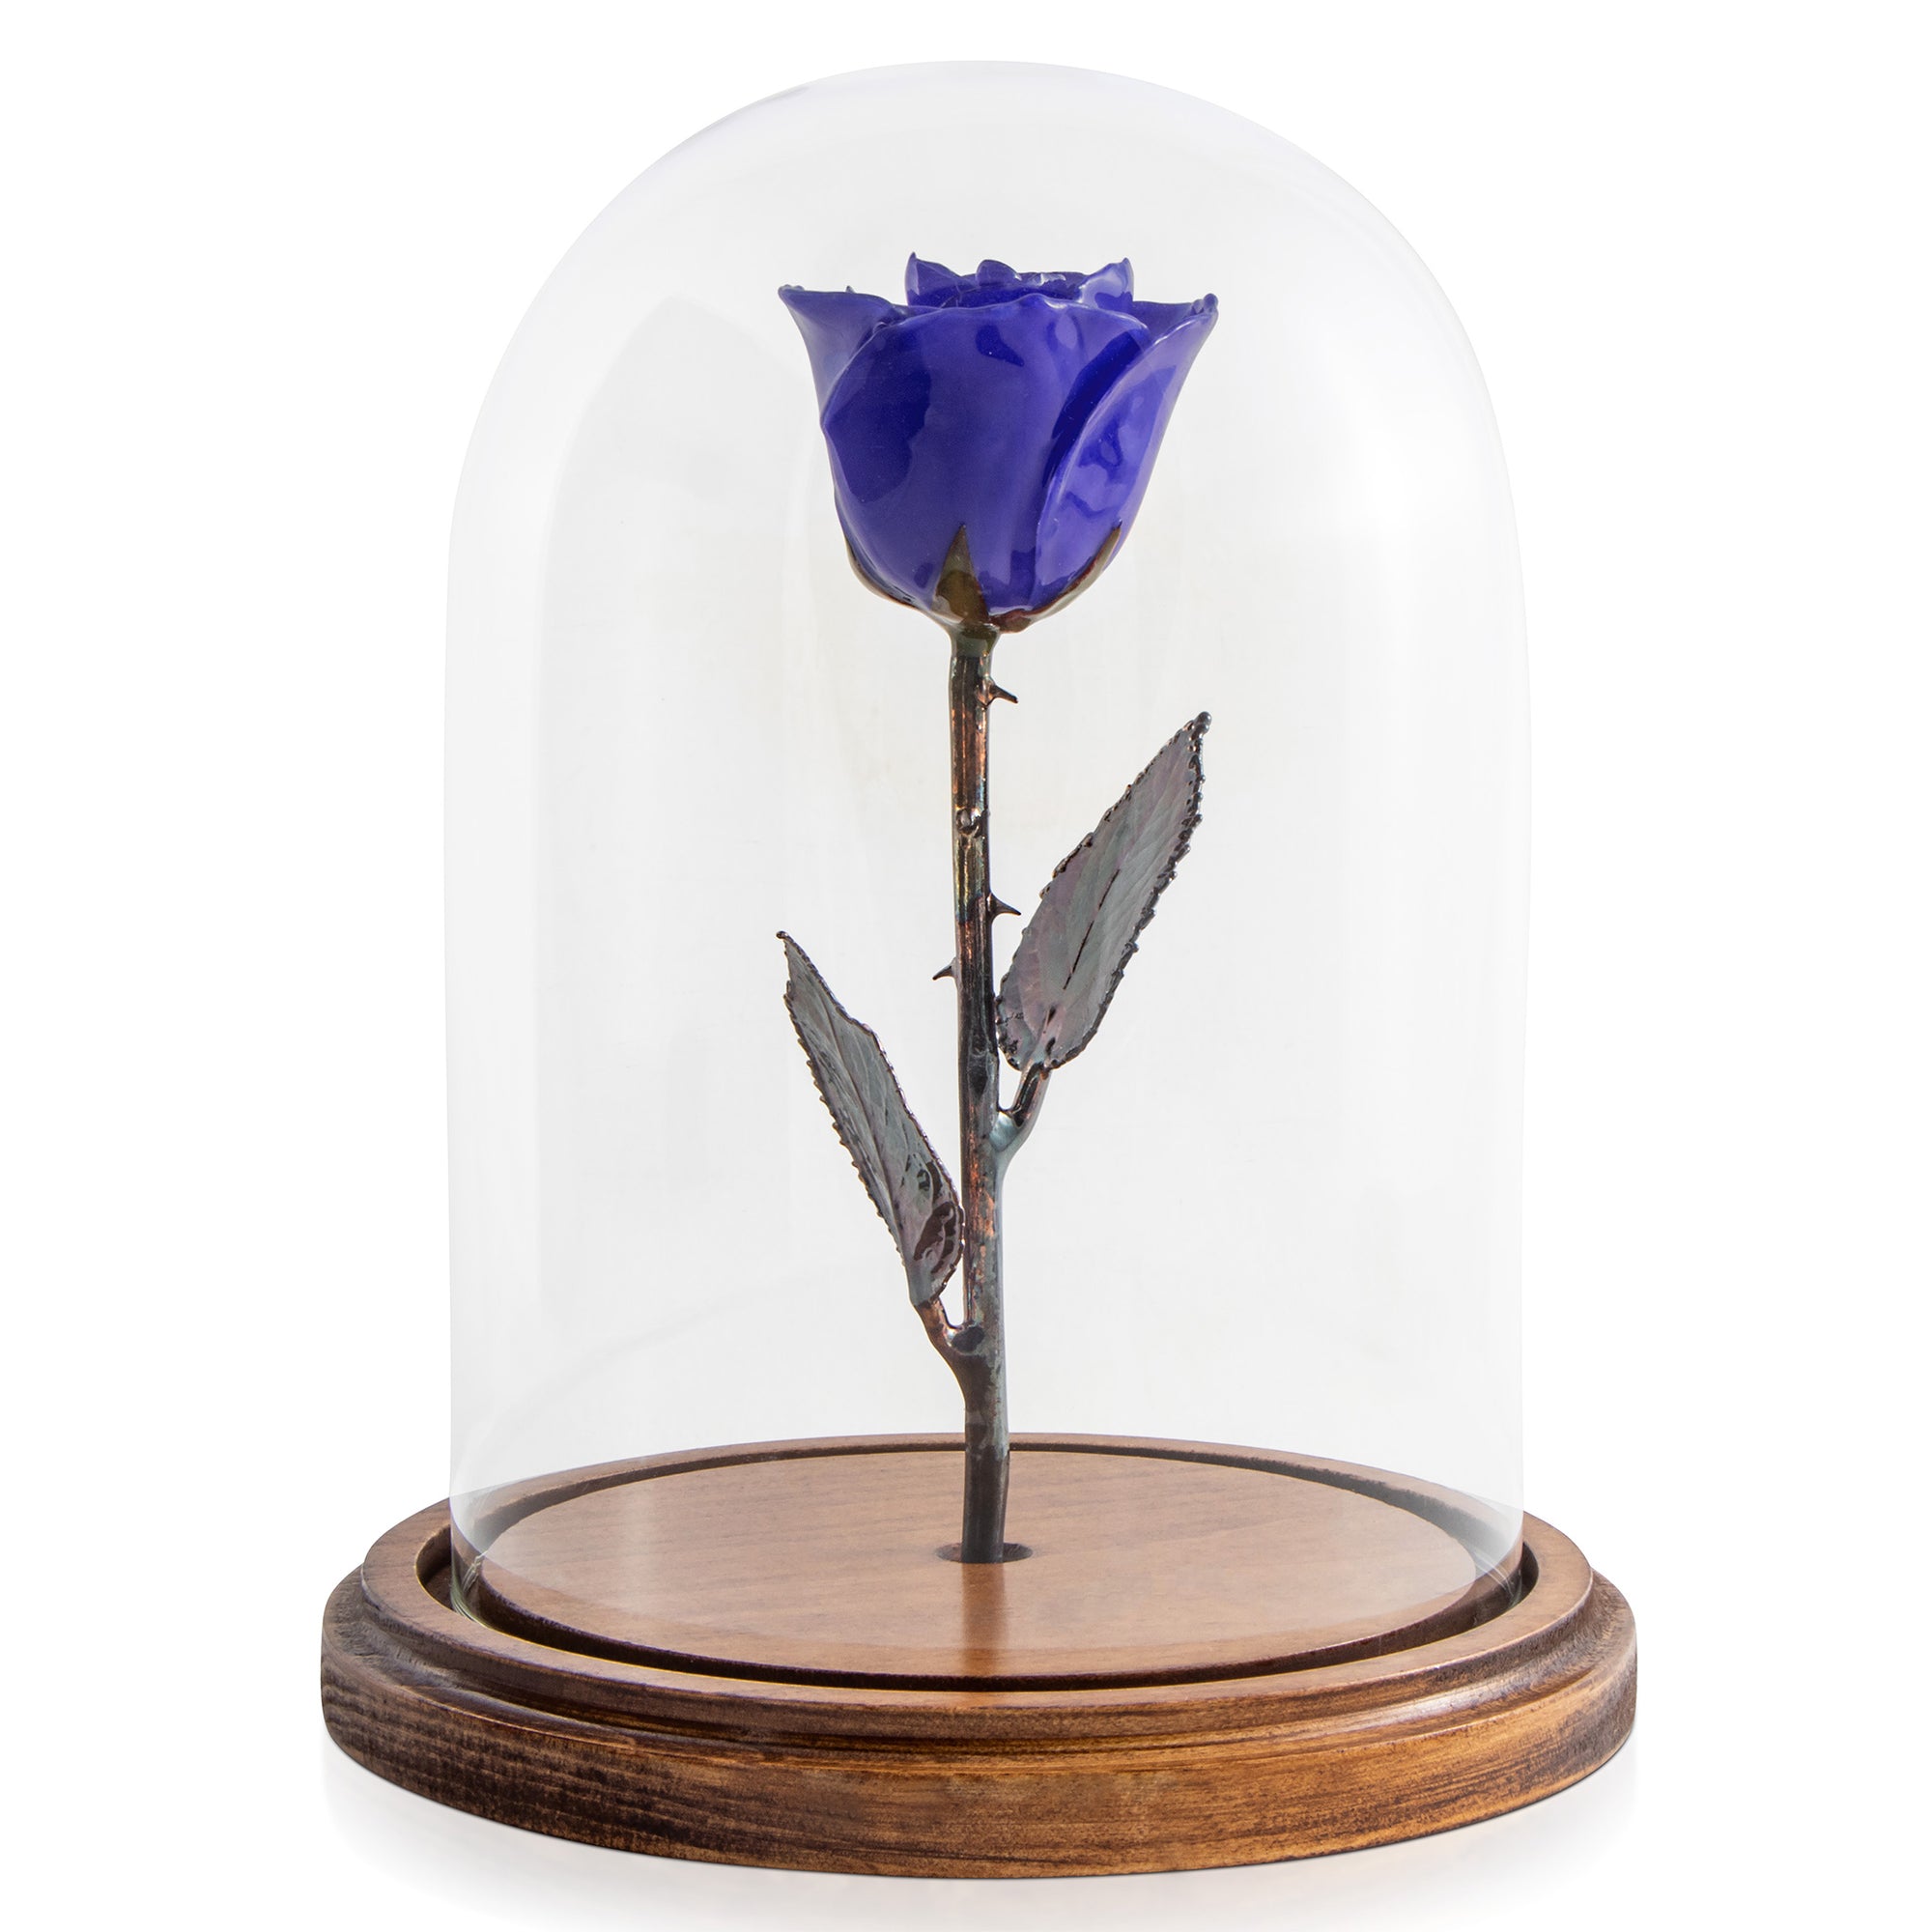 Violet Pearl Enchanted Rose (aka Beauty & The Beast Rose) with Patina Copper Stem Mounted to A Hand Turned Solid Wood Base under a glass dome.